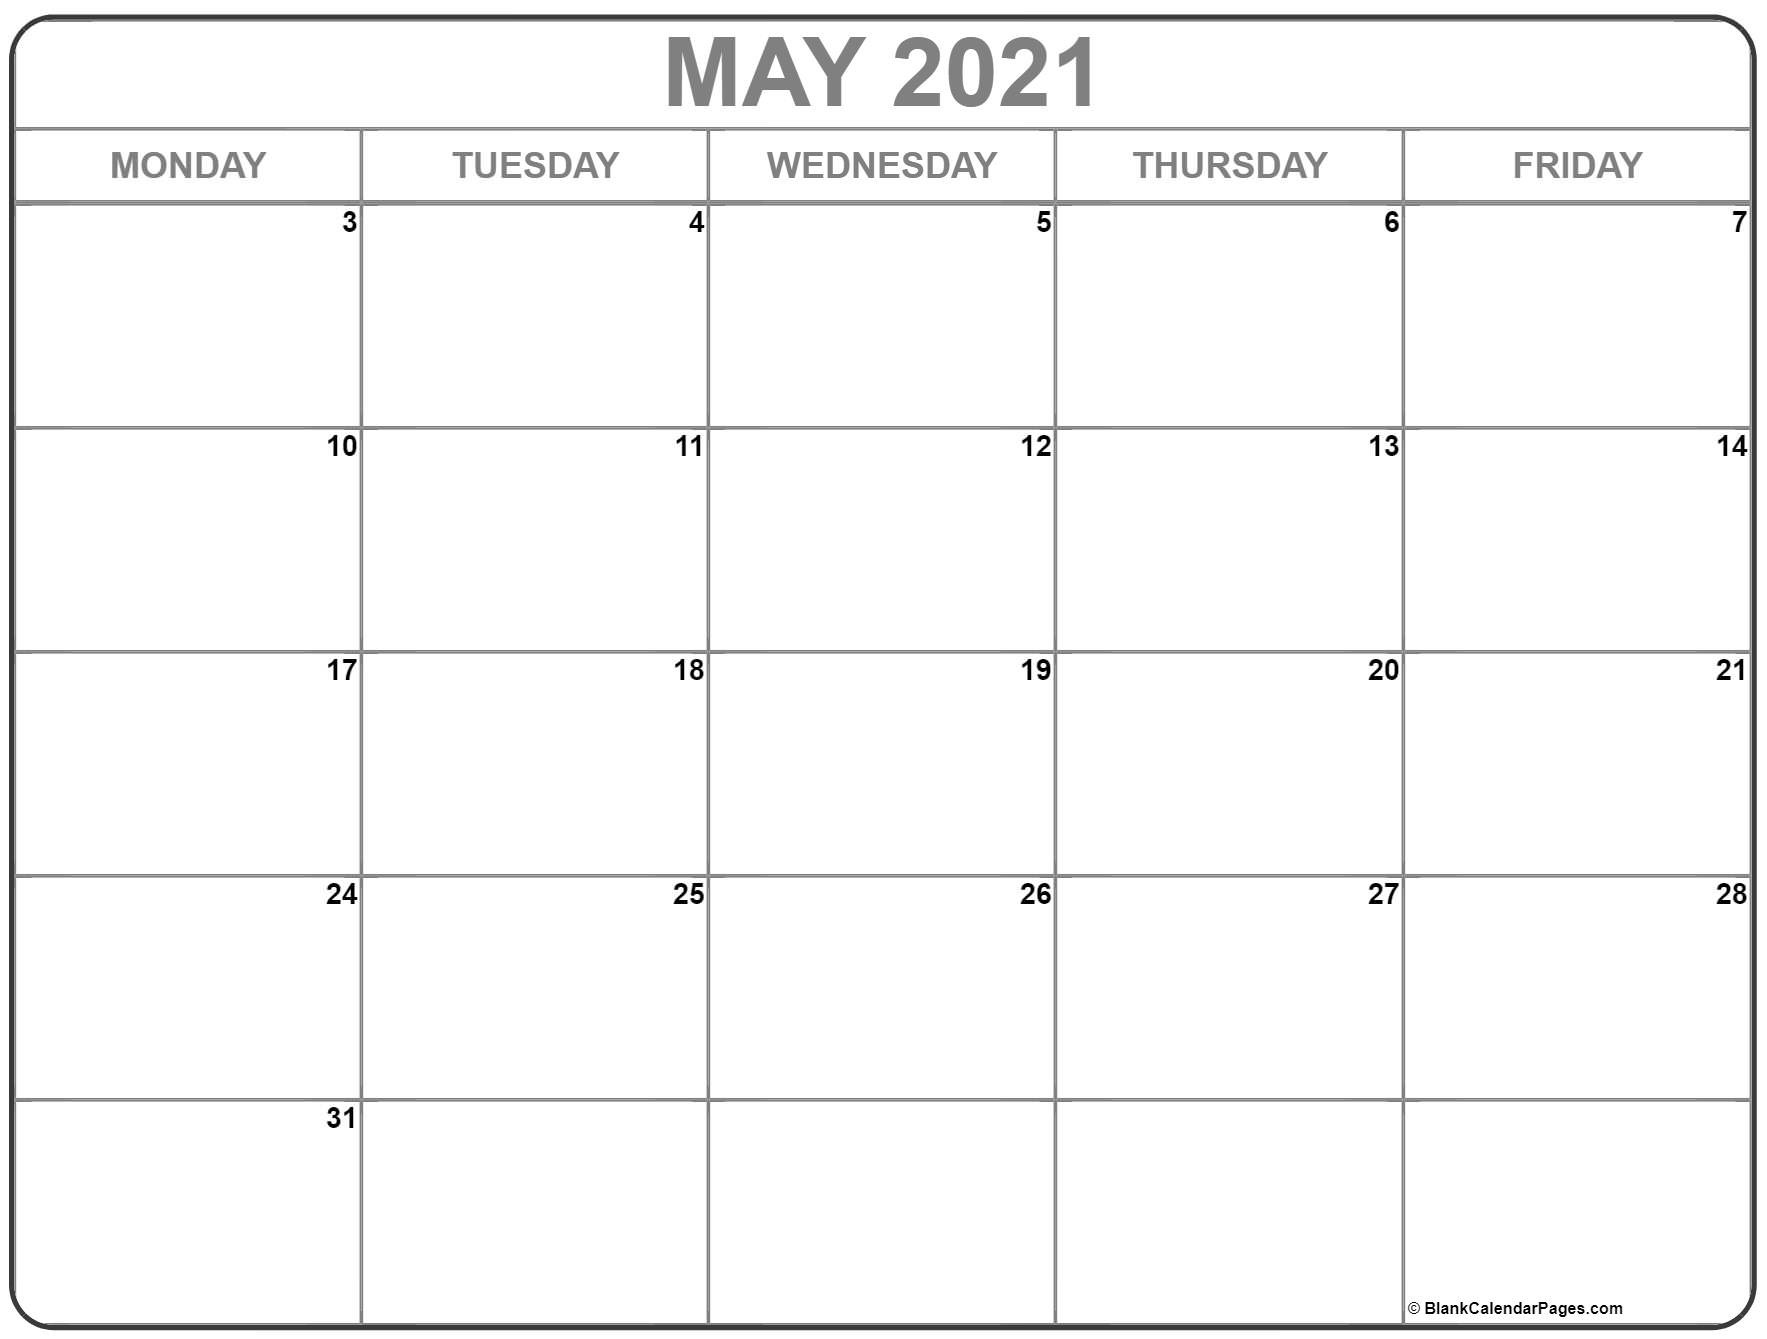 May 2021 Monday Calendar | Monday To Sunday-Blank Monday Through Friday Schedule For 2021